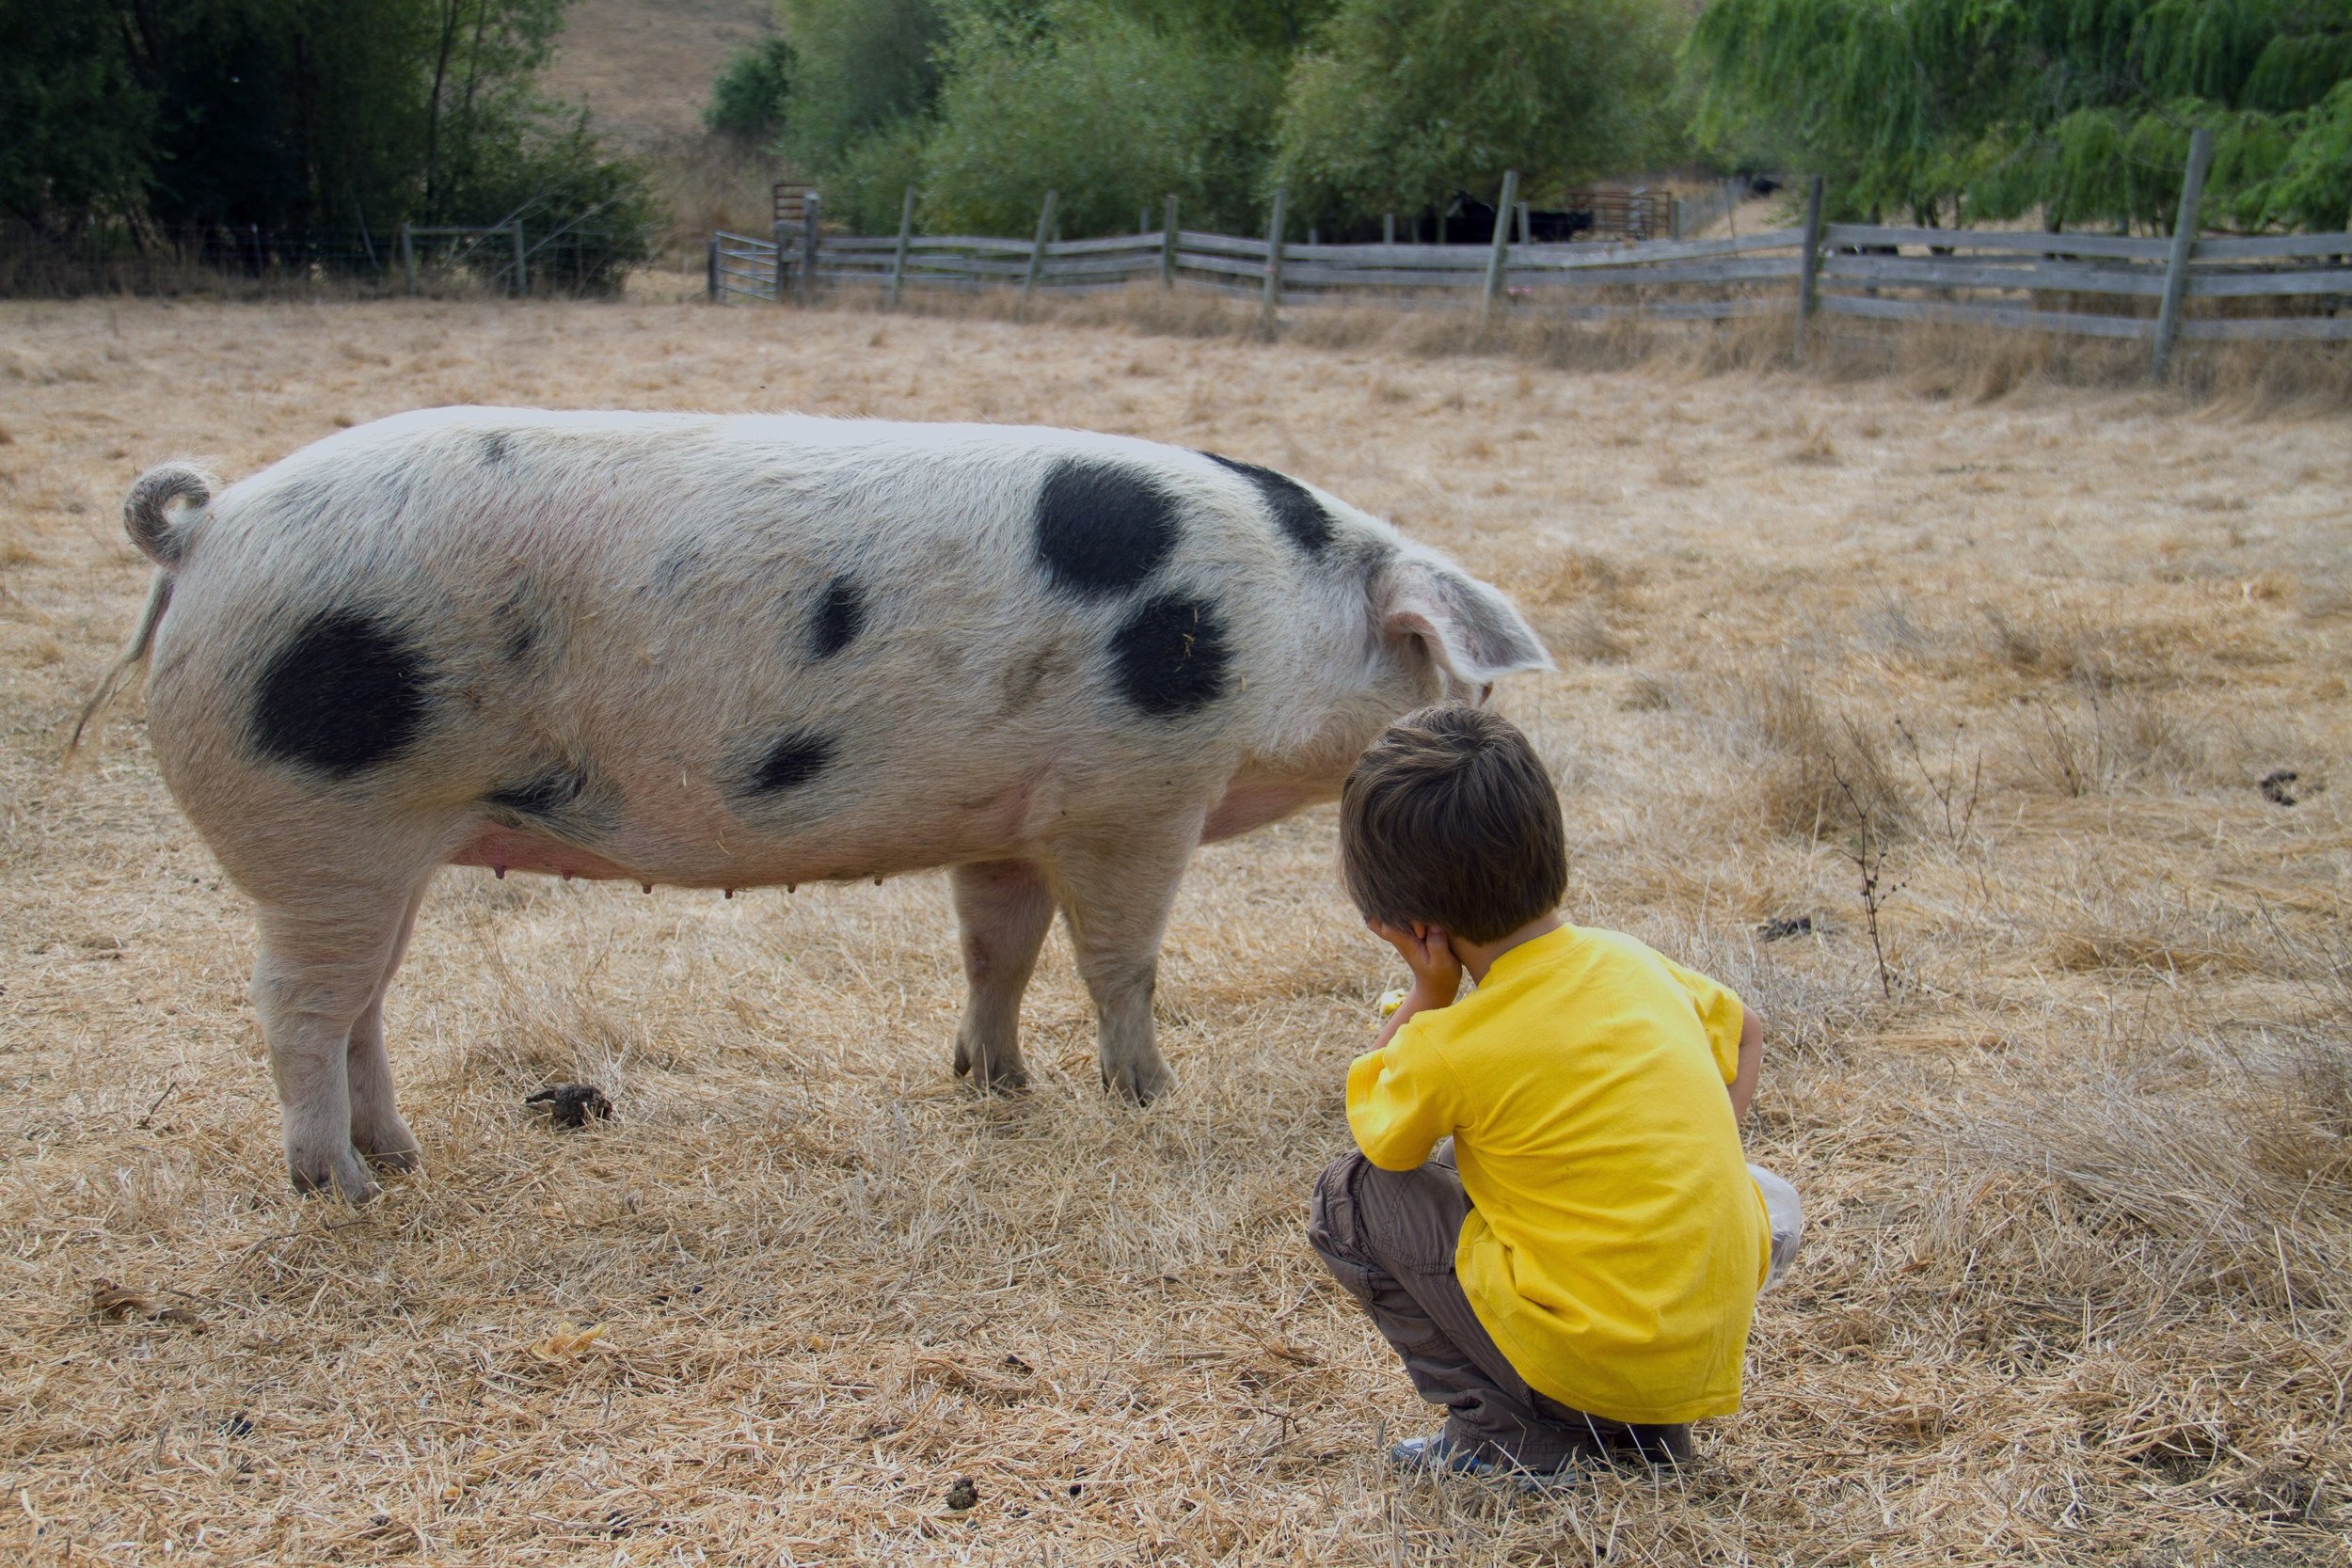 Boy and Pig